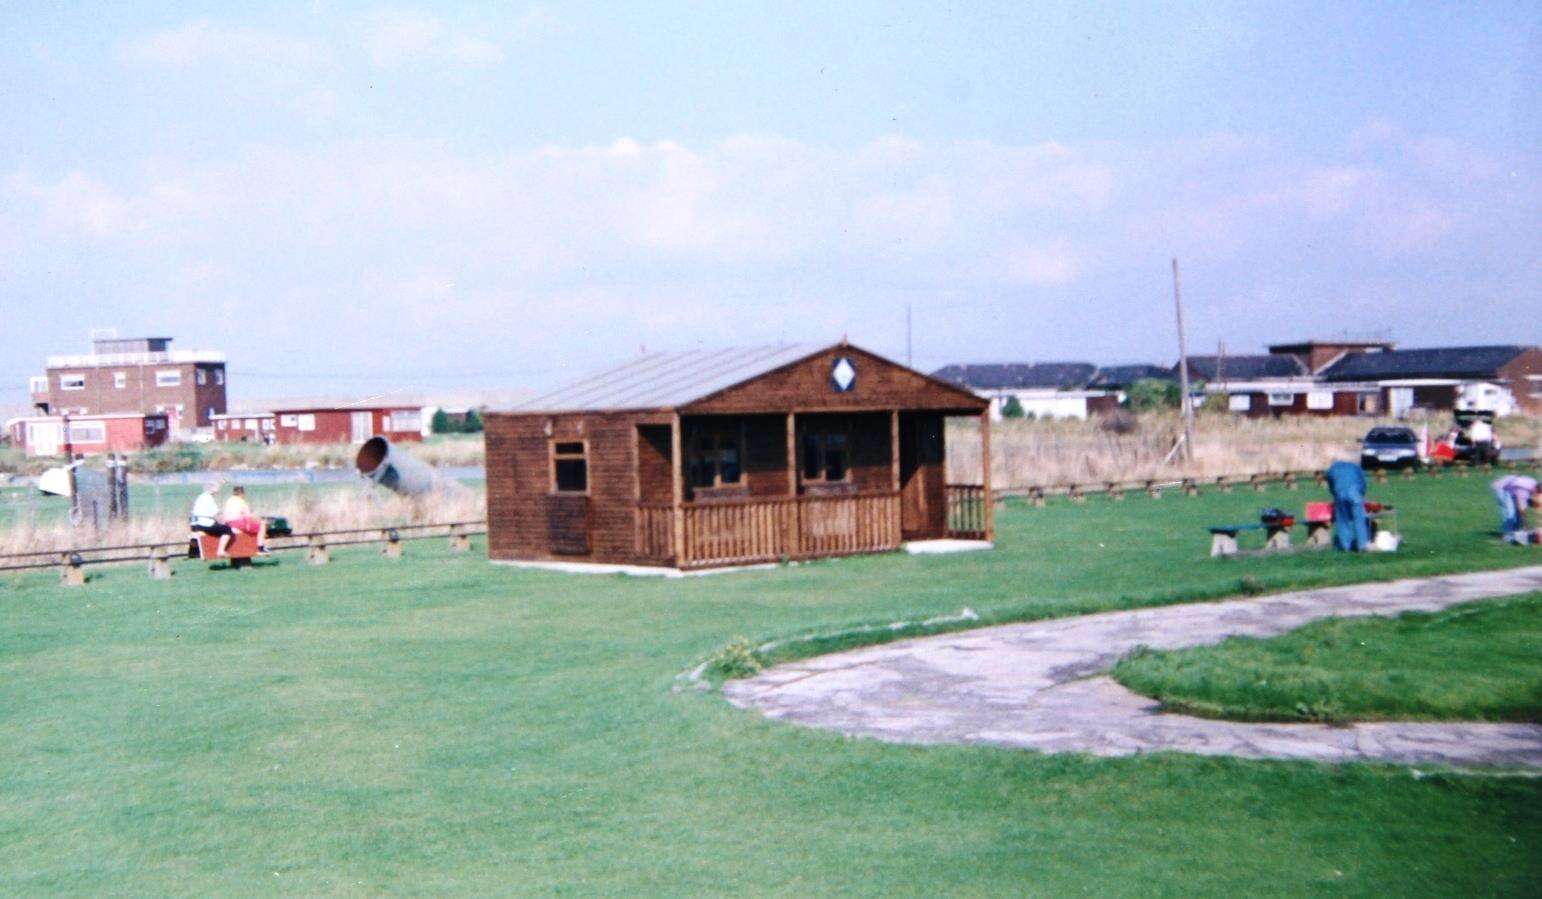 The original wooden clubhouse of the Sheppey Miniature Engineering and Model Society whihc was destroyed by fire at Barton's Point, Sheerness, in 1998 (3276452)